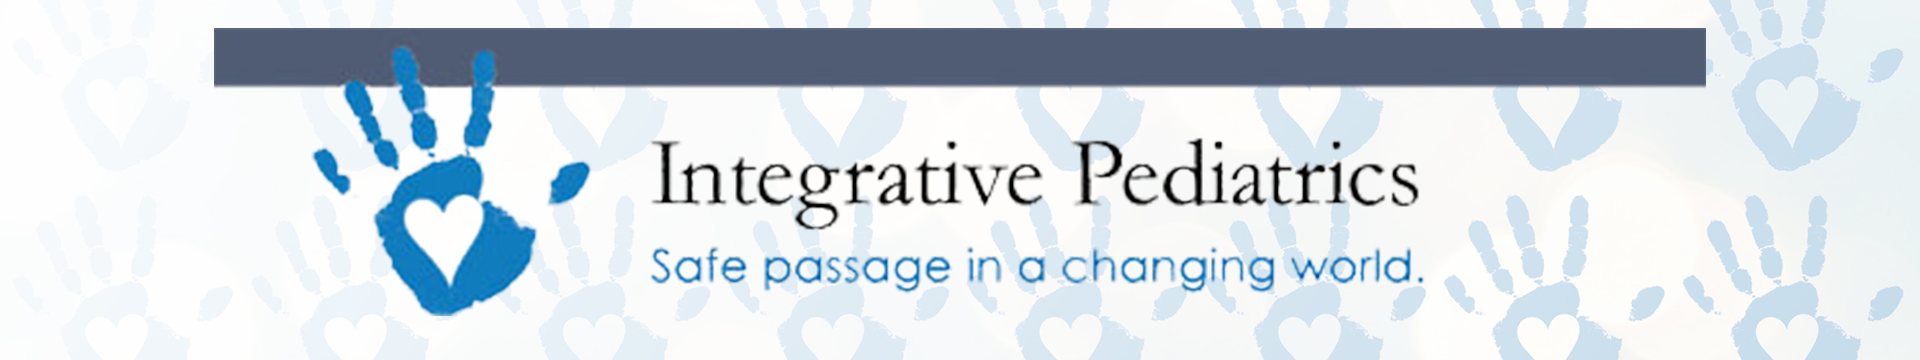  Integrative Pediatrics: A safe passage in a changing world.Picture